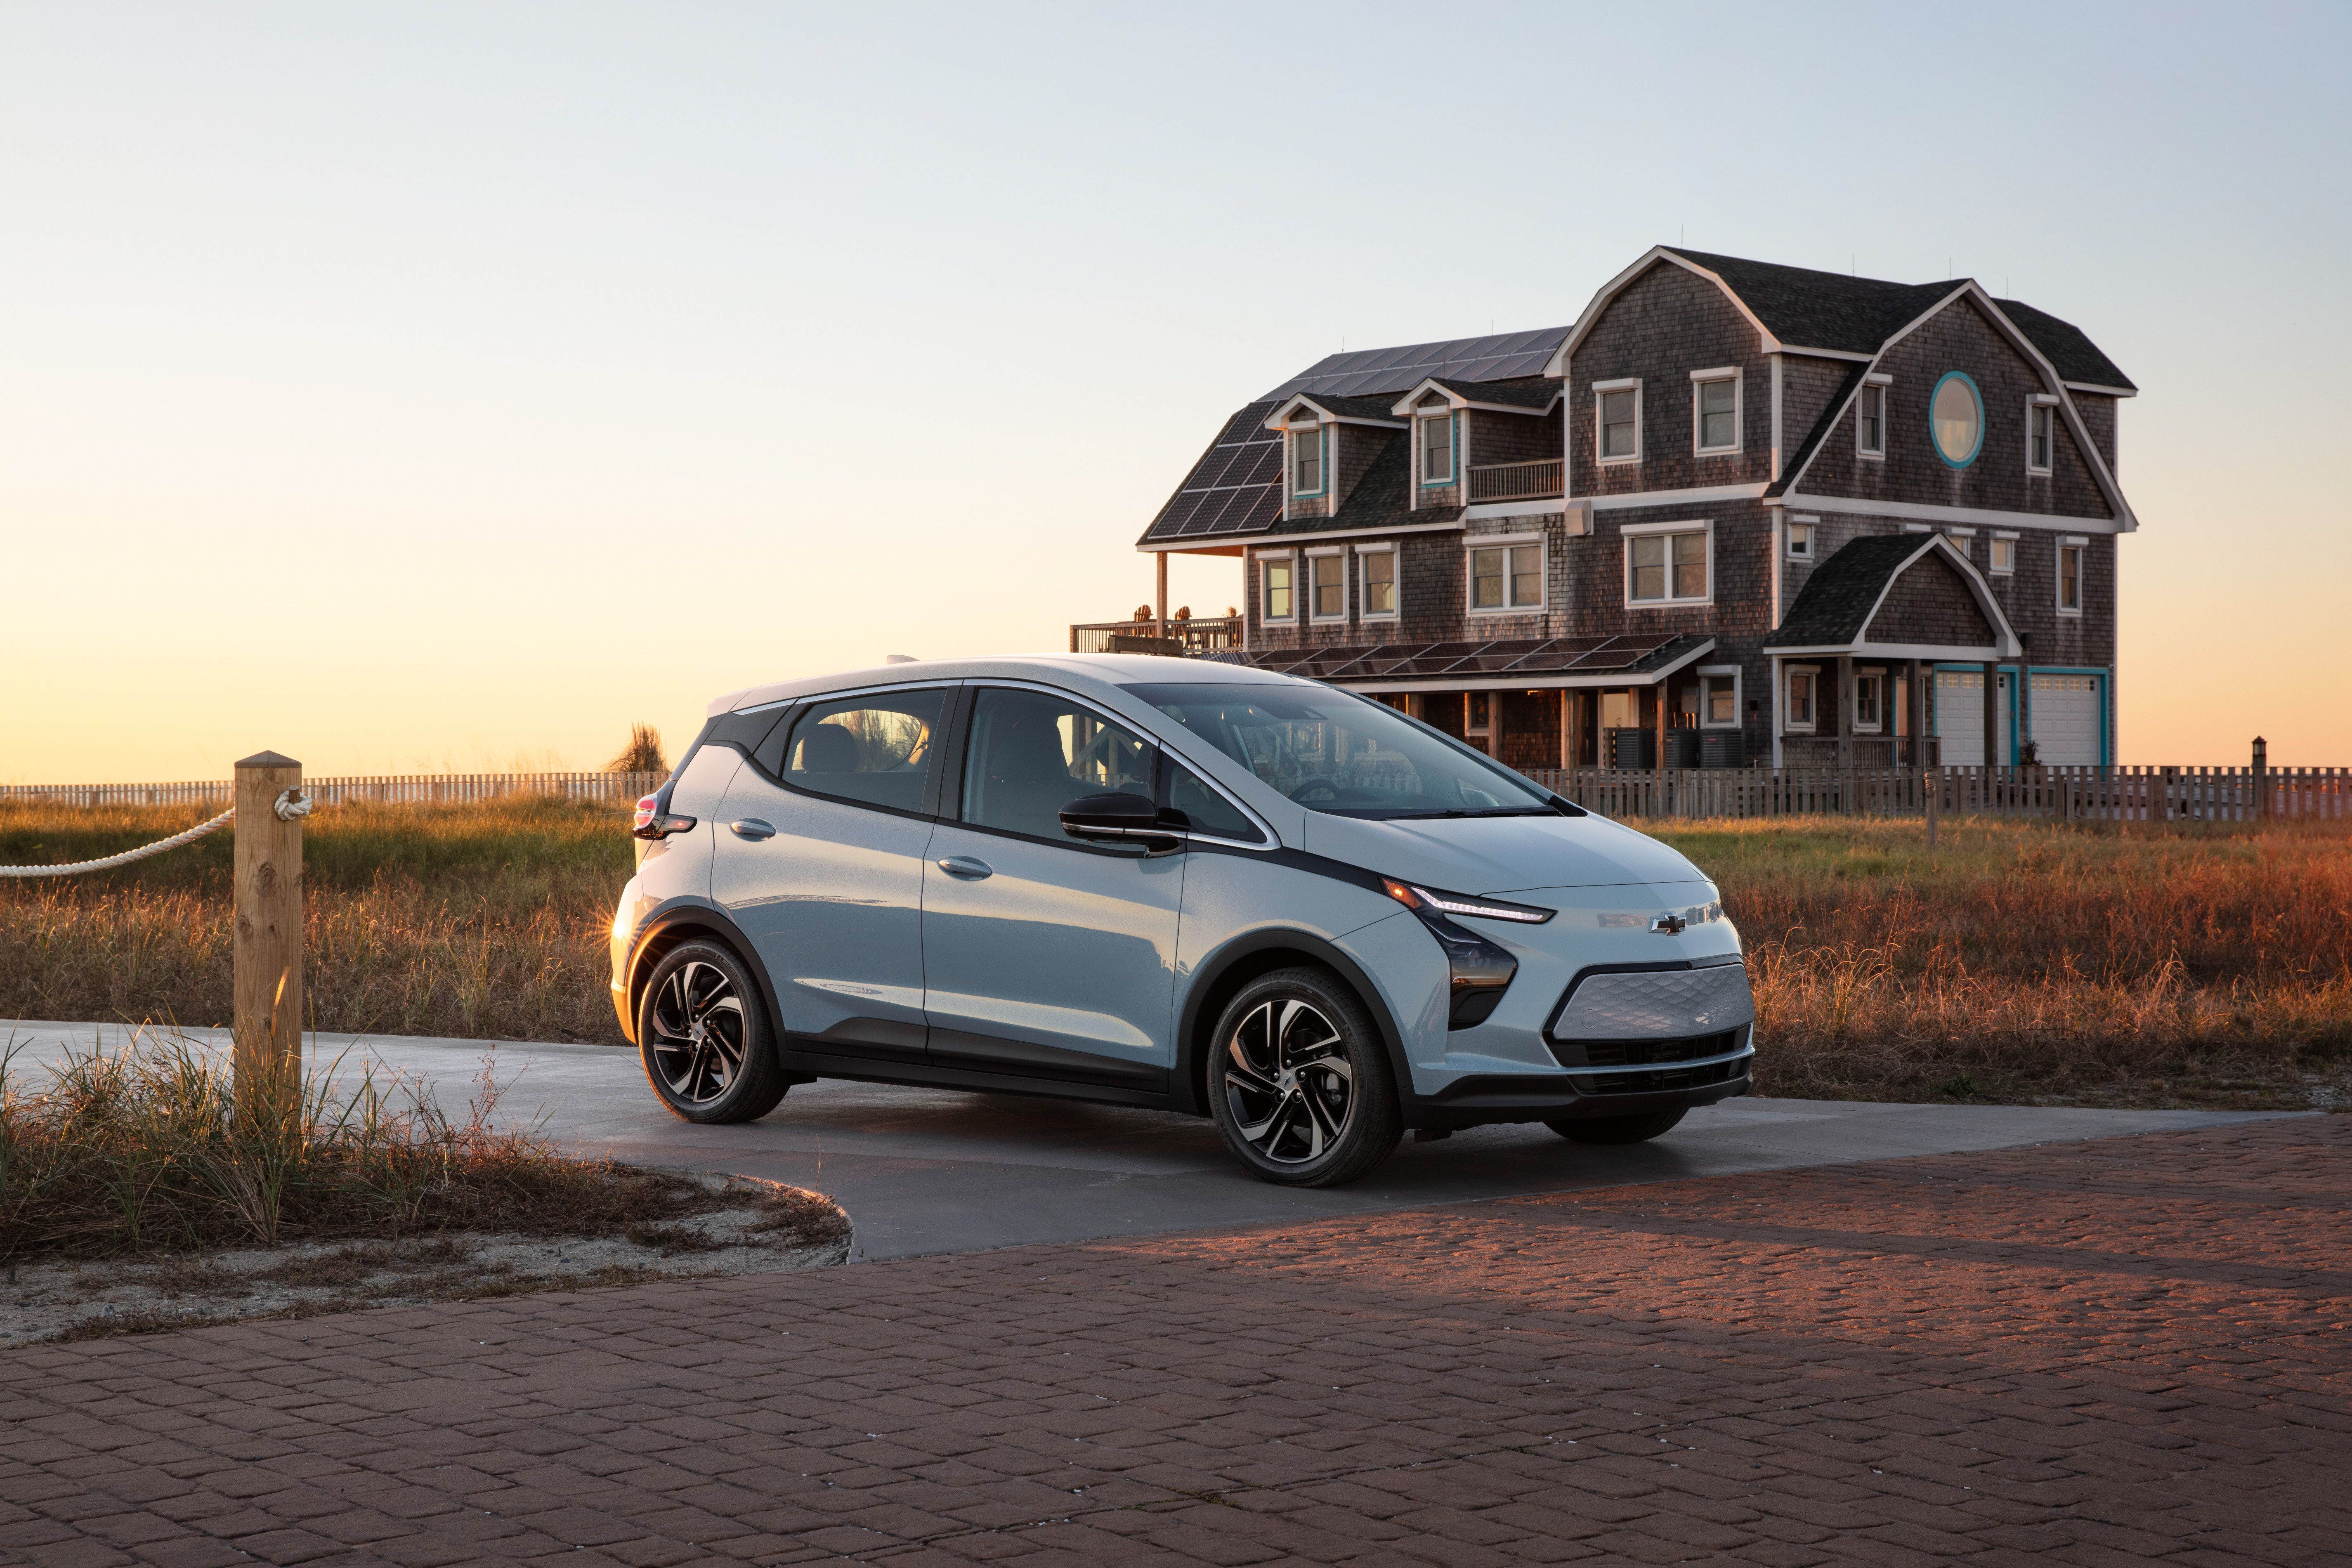 2022 Chevrolet Bolt EV Review, Pricing, and Specs